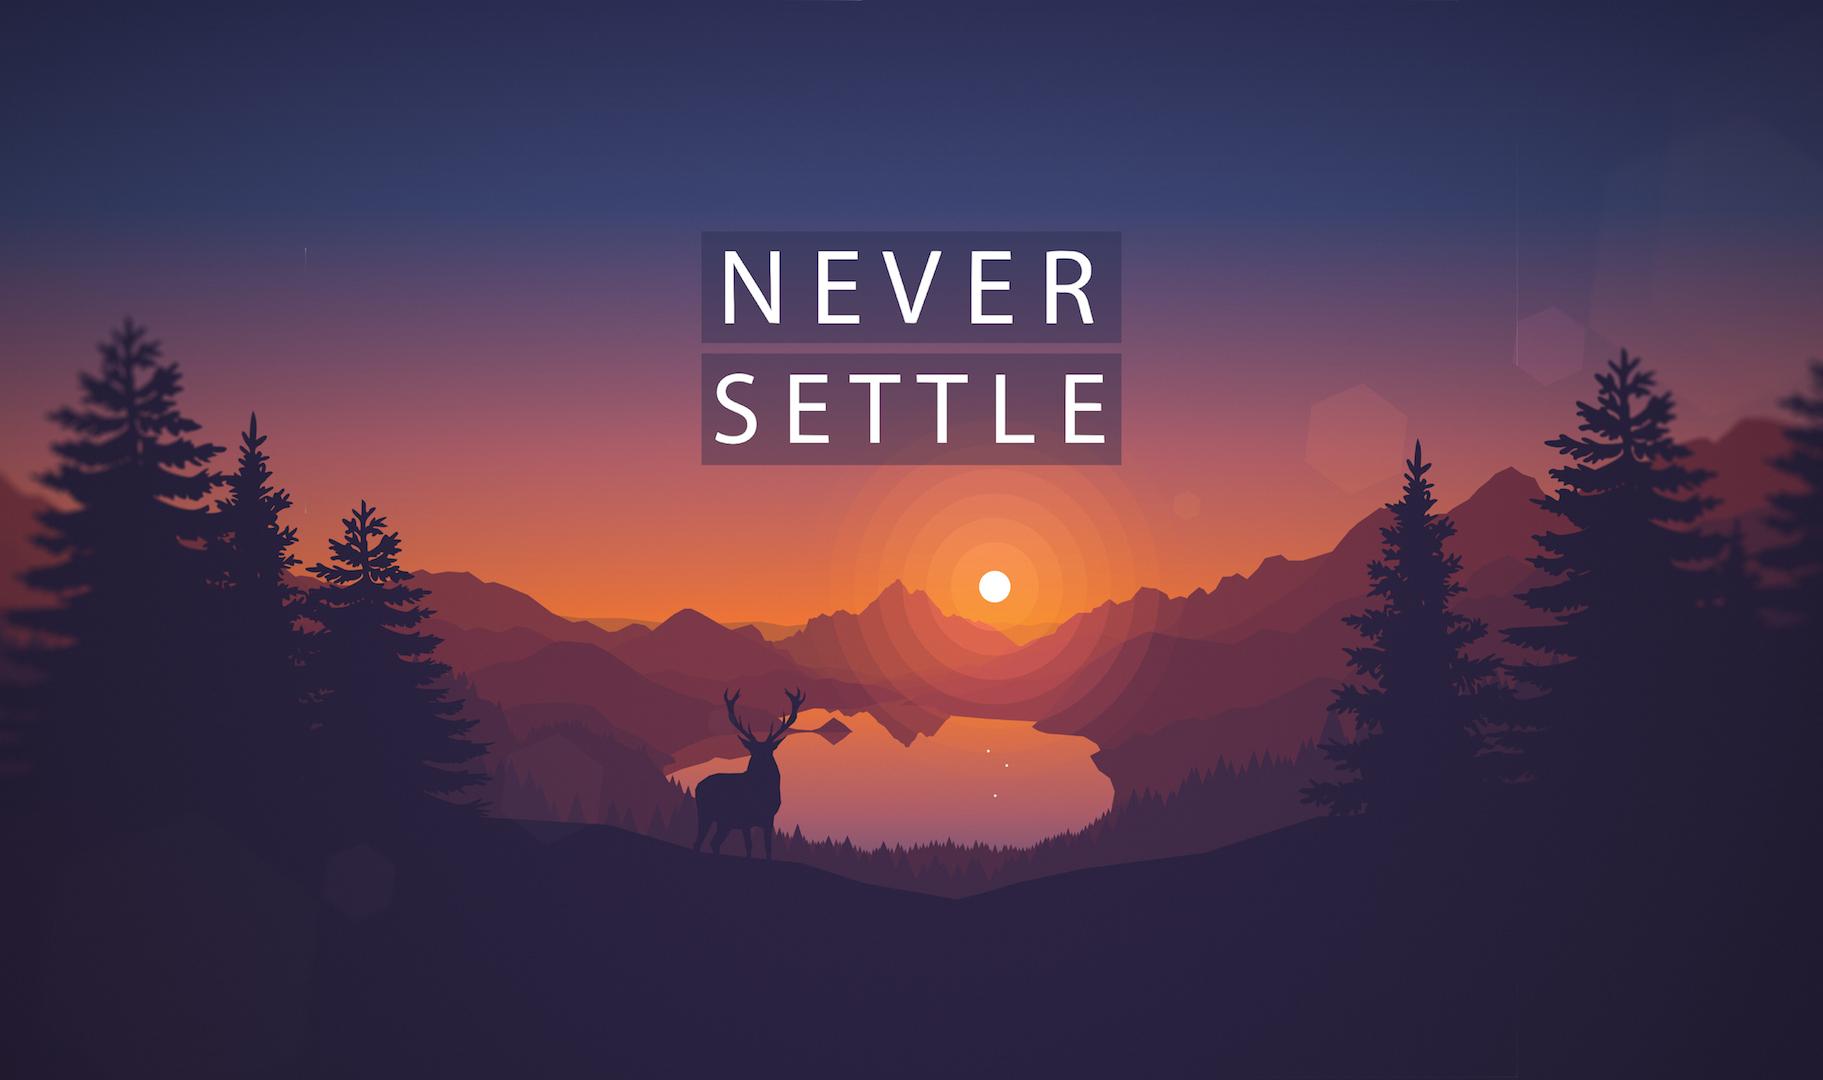 Make The Year You Never Settle